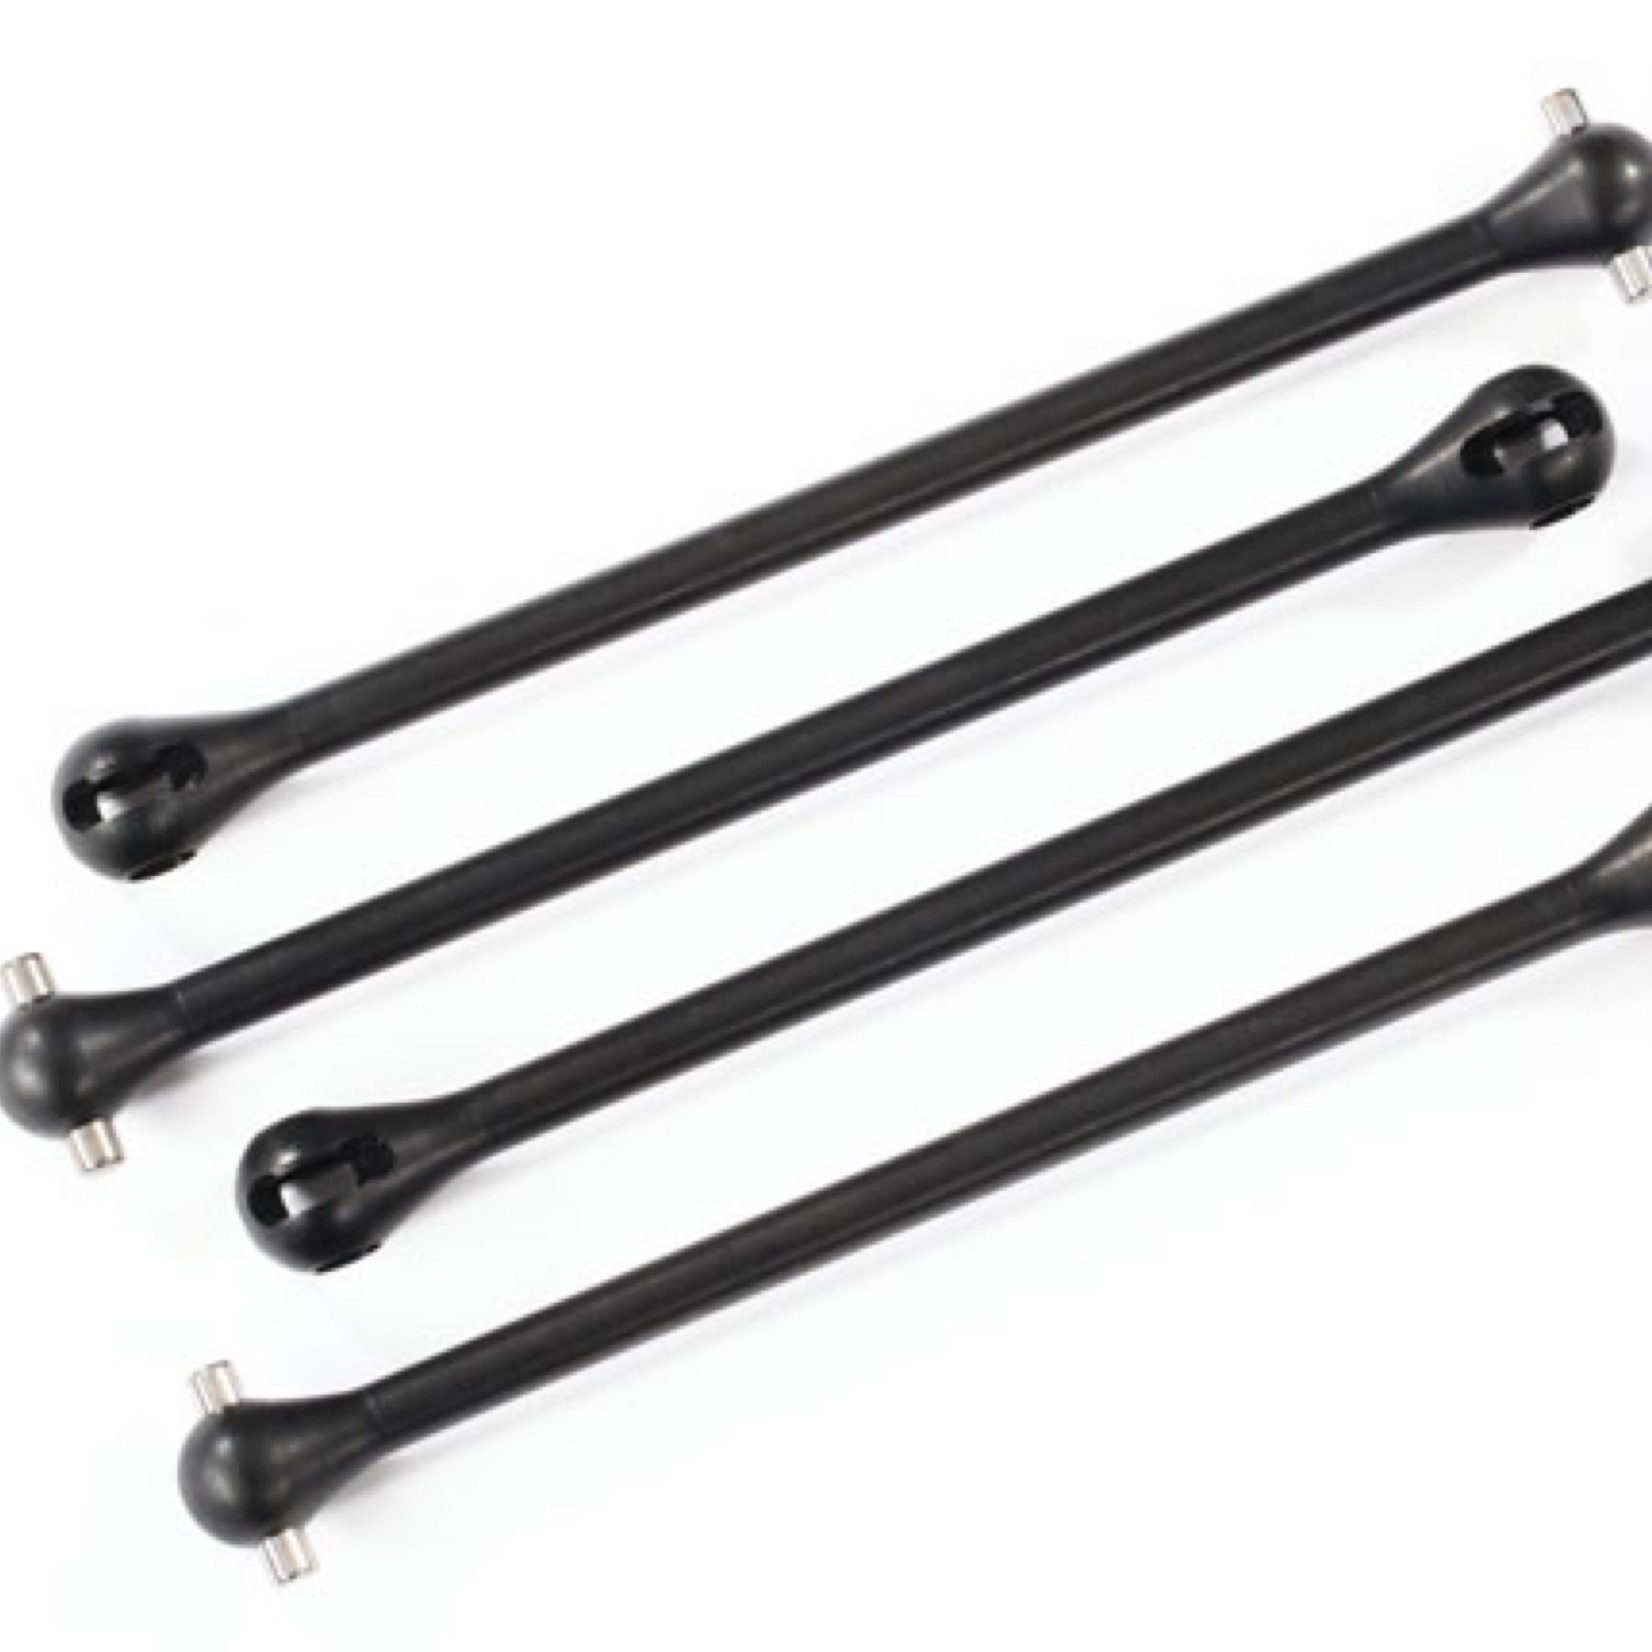 Traxxas Traxxas Maxx Front/Rear Constant-Velocity Steel Driveshaft (109.5mm) #8996A